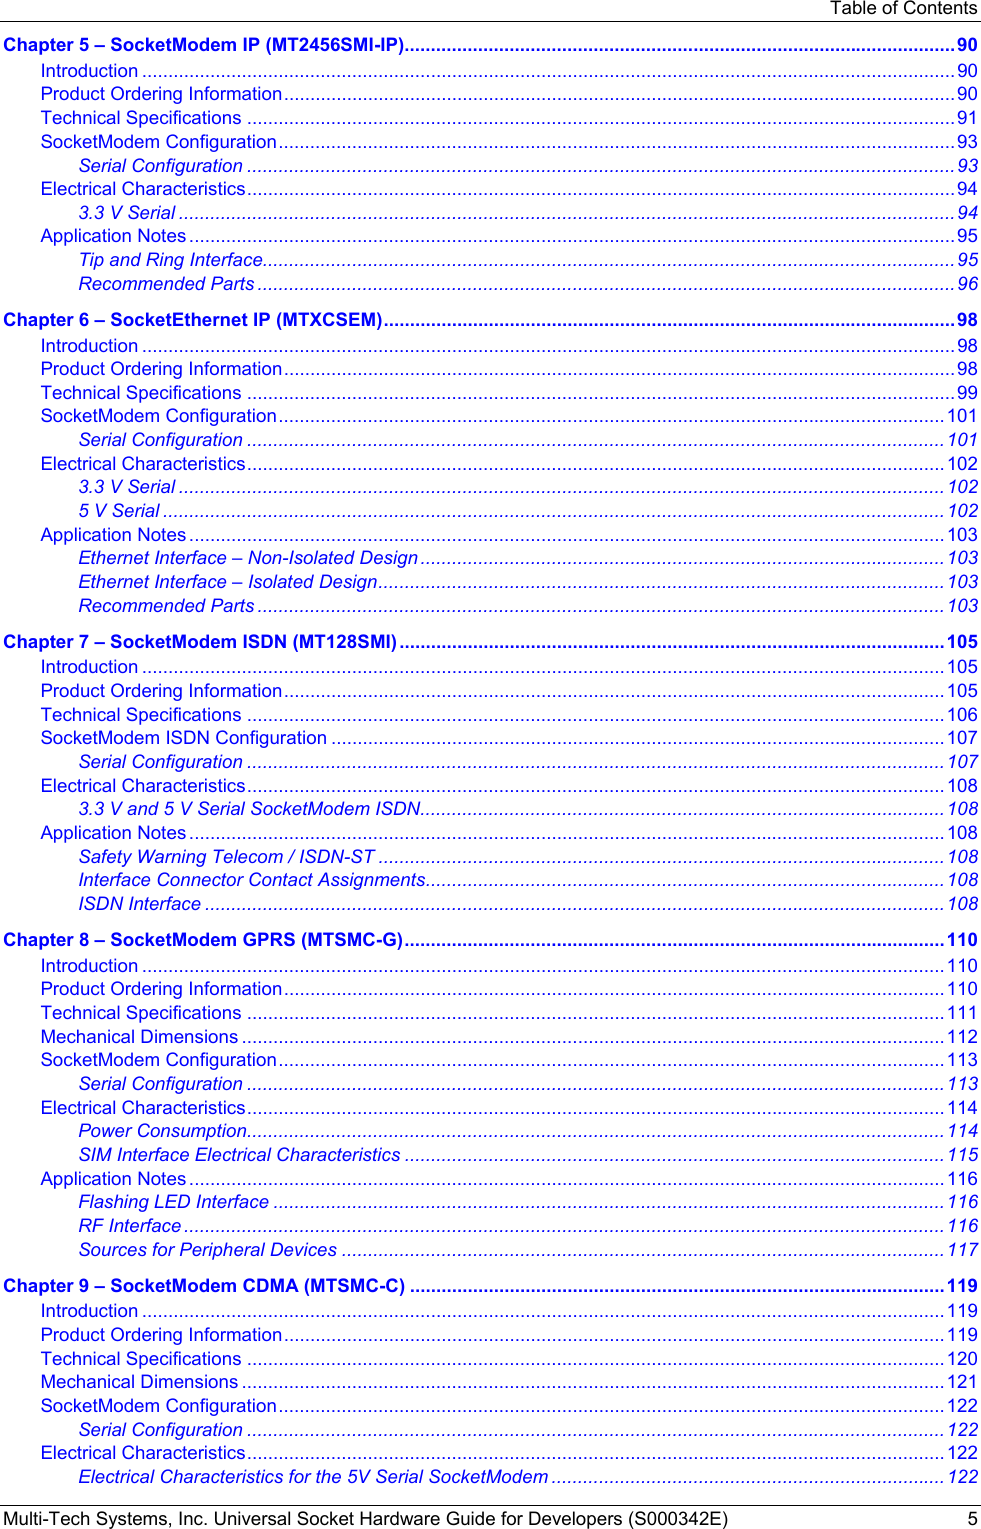 Table of Contents Multi-Tech Systems, Inc. Universal Socket Hardware Guide for Developers (S000342E)  5 Chapter 5 – SocketModem IP (MT2456SMI-IP).........................................................................................................90 Introduction ...........................................................................................................................................................90 Product Ordering Information................................................................................................................................90 Technical Specifications .......................................................................................................................................91 SocketModem Configuration.................................................................................................................................93 Serial Configuration .......................................................................................................................................93 Electrical Characteristics.......................................................................................................................................94 3.3 V Serial ....................................................................................................................................................94 Application Notes ..................................................................................................................................................95 Tip and Ring Interface....................................................................................................................................95 Recommended Parts .....................................................................................................................................96 Chapter 6 – SocketEthernet IP (MTXCSEM).............................................................................................................98 Introduction ...........................................................................................................................................................98 Product Ordering Information................................................................................................................................98 Technical Specifications .......................................................................................................................................99 SocketModem Configuration...............................................................................................................................101 Serial Configuration .....................................................................................................................................101 Electrical Characteristics.....................................................................................................................................102 3.3 V Serial ..................................................................................................................................................102 5 V Serial .....................................................................................................................................................102 Application Notes ................................................................................................................................................103 Ethernet Interface – Non-Isolated Design .................................................................................................... 103 Ethernet Interface – Isolated Design............................................................................................................103 Recommended Parts ...................................................................................................................................103 Chapter 7 – SocketModem ISDN (MT128SMI) ........................................................................................................105 Introduction .........................................................................................................................................................105 Product Ordering Information..............................................................................................................................105 Technical Specifications .....................................................................................................................................106 SocketModem ISDN Configuration .....................................................................................................................107 Serial Configuration .....................................................................................................................................107 Electrical Characteristics.....................................................................................................................................108 3.3 V and 5 V Serial SocketModem ISDN....................................................................................................108 Application Notes ................................................................................................................................................108 Safety Warning Telecom / ISDN-ST ............................................................................................................ 108 Interface Connector Contact Assignments...................................................................................................108 ISDN Interface .............................................................................................................................................108 Chapter 8 – SocketModem GPRS (MTSMC-G).......................................................................................................110 Introduction .........................................................................................................................................................110 Product Ordering Information..............................................................................................................................110 Technical Specifications .....................................................................................................................................111 Mechanical Dimensions ......................................................................................................................................112 SocketModem Configuration...............................................................................................................................113 Serial Configuration .....................................................................................................................................113 Electrical Characteristics.....................................................................................................................................114 Power Consumption.....................................................................................................................................114 SIM Interface Electrical Characteristics .......................................................................................................115 Application Notes ................................................................................................................................................116 Flashing LED Interface ................................................................................................................................116 RF Interface .................................................................................................................................................116 Sources for Peripheral Devices ...................................................................................................................117 Chapter 9 – SocketModem CDMA (MTSMC-C) ......................................................................................................119 Introduction .........................................................................................................................................................119 Product Ordering Information..............................................................................................................................119 Technical Specifications .....................................................................................................................................120 Mechanical Dimensions ......................................................................................................................................121 SocketModem Configuration...............................................................................................................................122 Serial Configuration .....................................................................................................................................122 Electrical Characteristics.....................................................................................................................................122 Electrical Characteristics for the 5V Serial SocketModem ...........................................................................122 